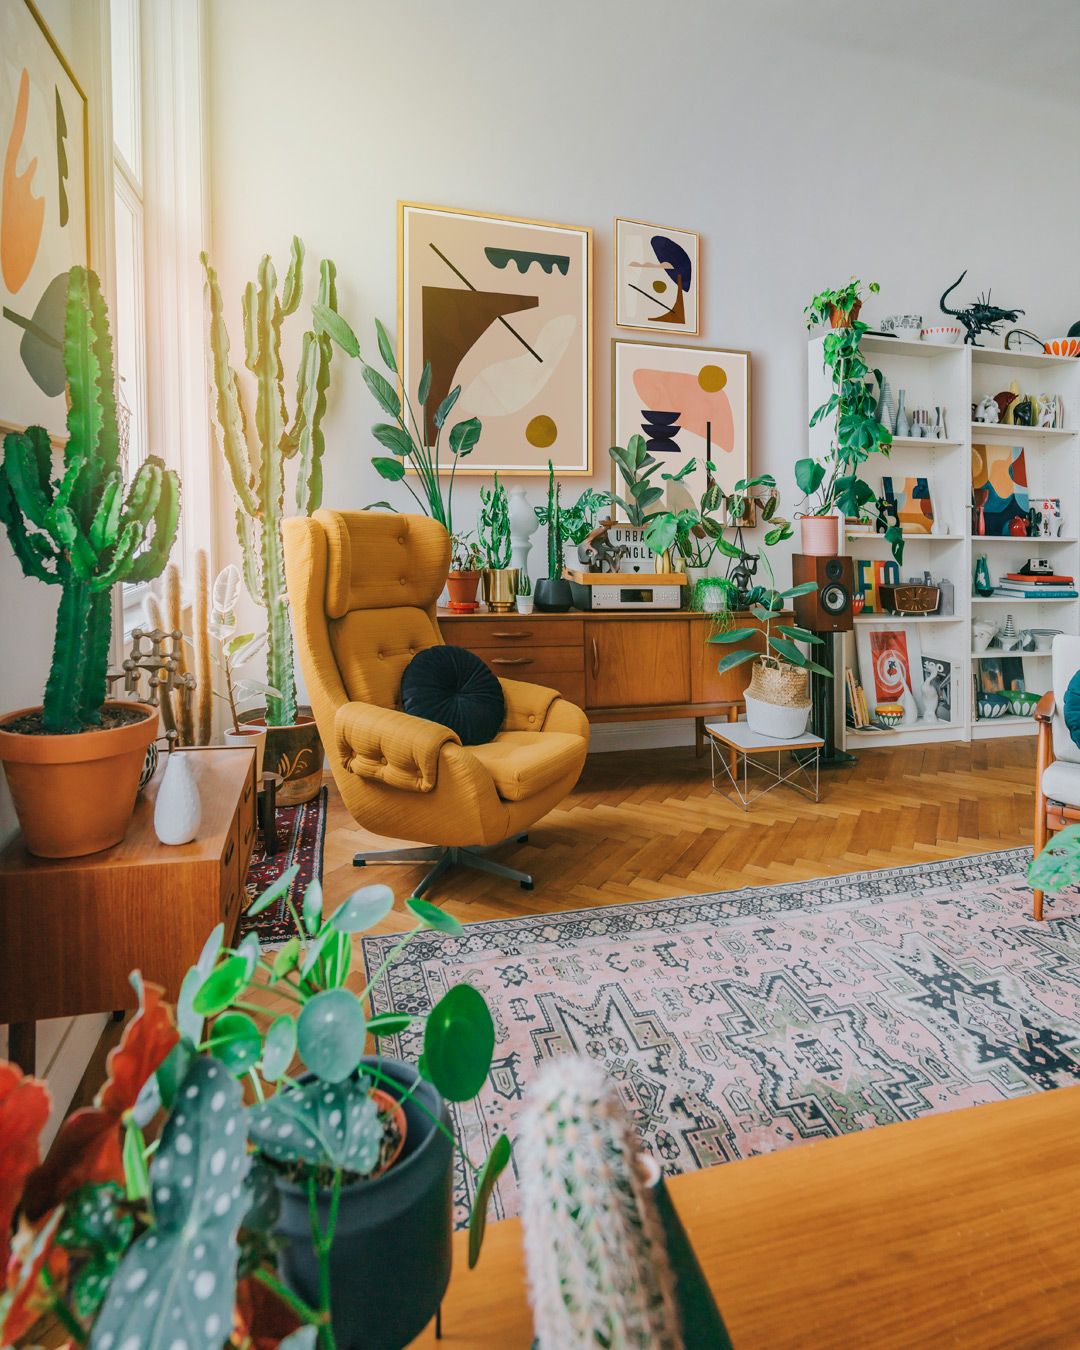 A well-decorated living room filled with lush plants and stylish furniture